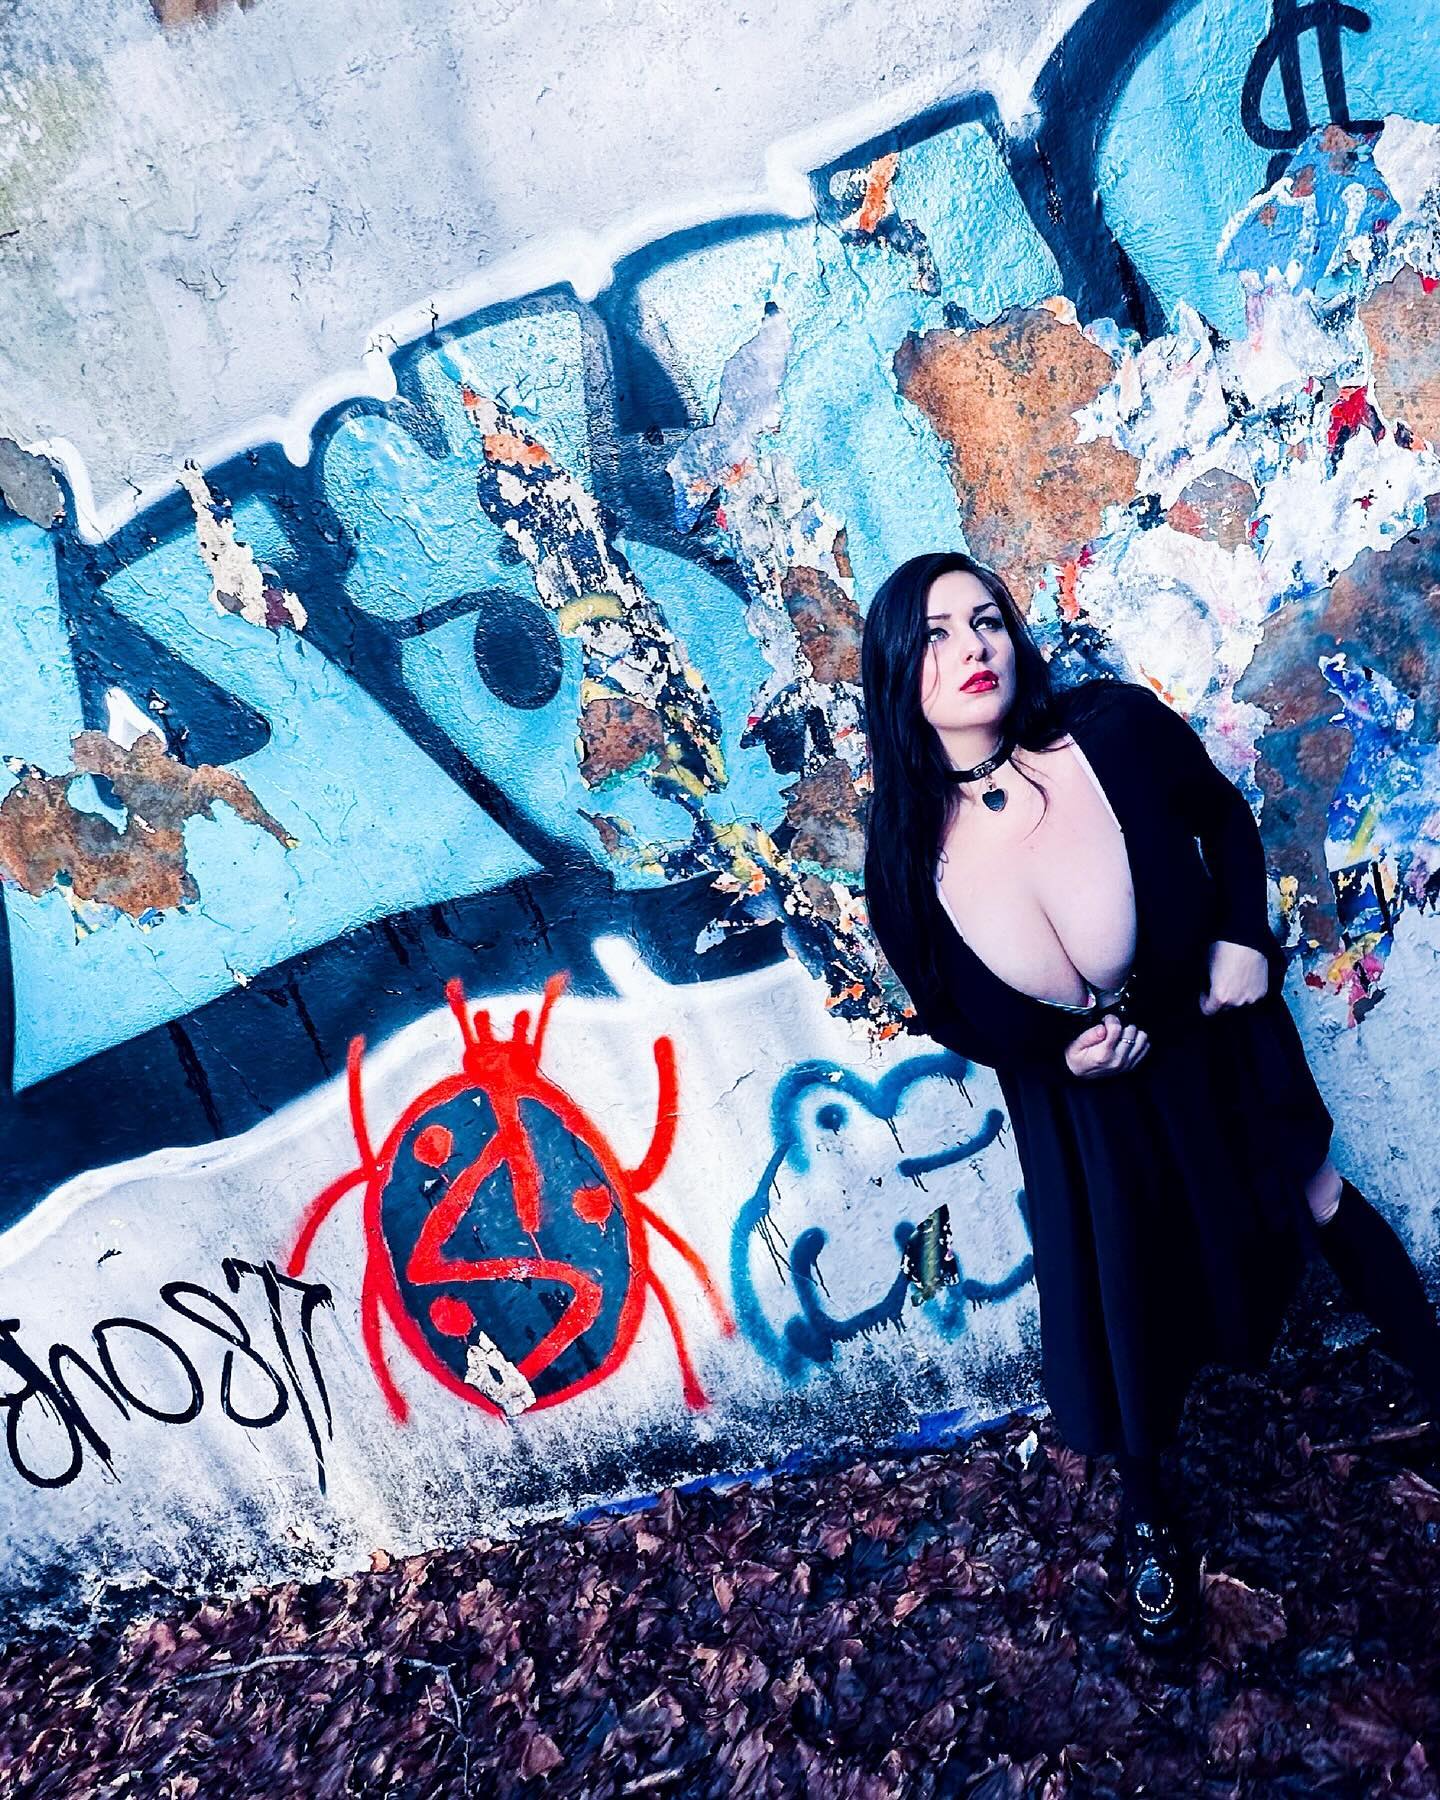 If ever the devil was born, without a pair of horns, it was you… 

#jezebel #frankielane #graffitiart #abandonedplaces #militaryfort #newengland #emogirl #gothgirl #altmodel #blackismyhappycolor #allnatural #nophotoshop #busty #blessed #btggf #gothgf #curvygirl #hourglass #inthewoods #decayingbeauty #palegirl #gothicstyle #alternativestyle #emoforlife #emotional #feelings